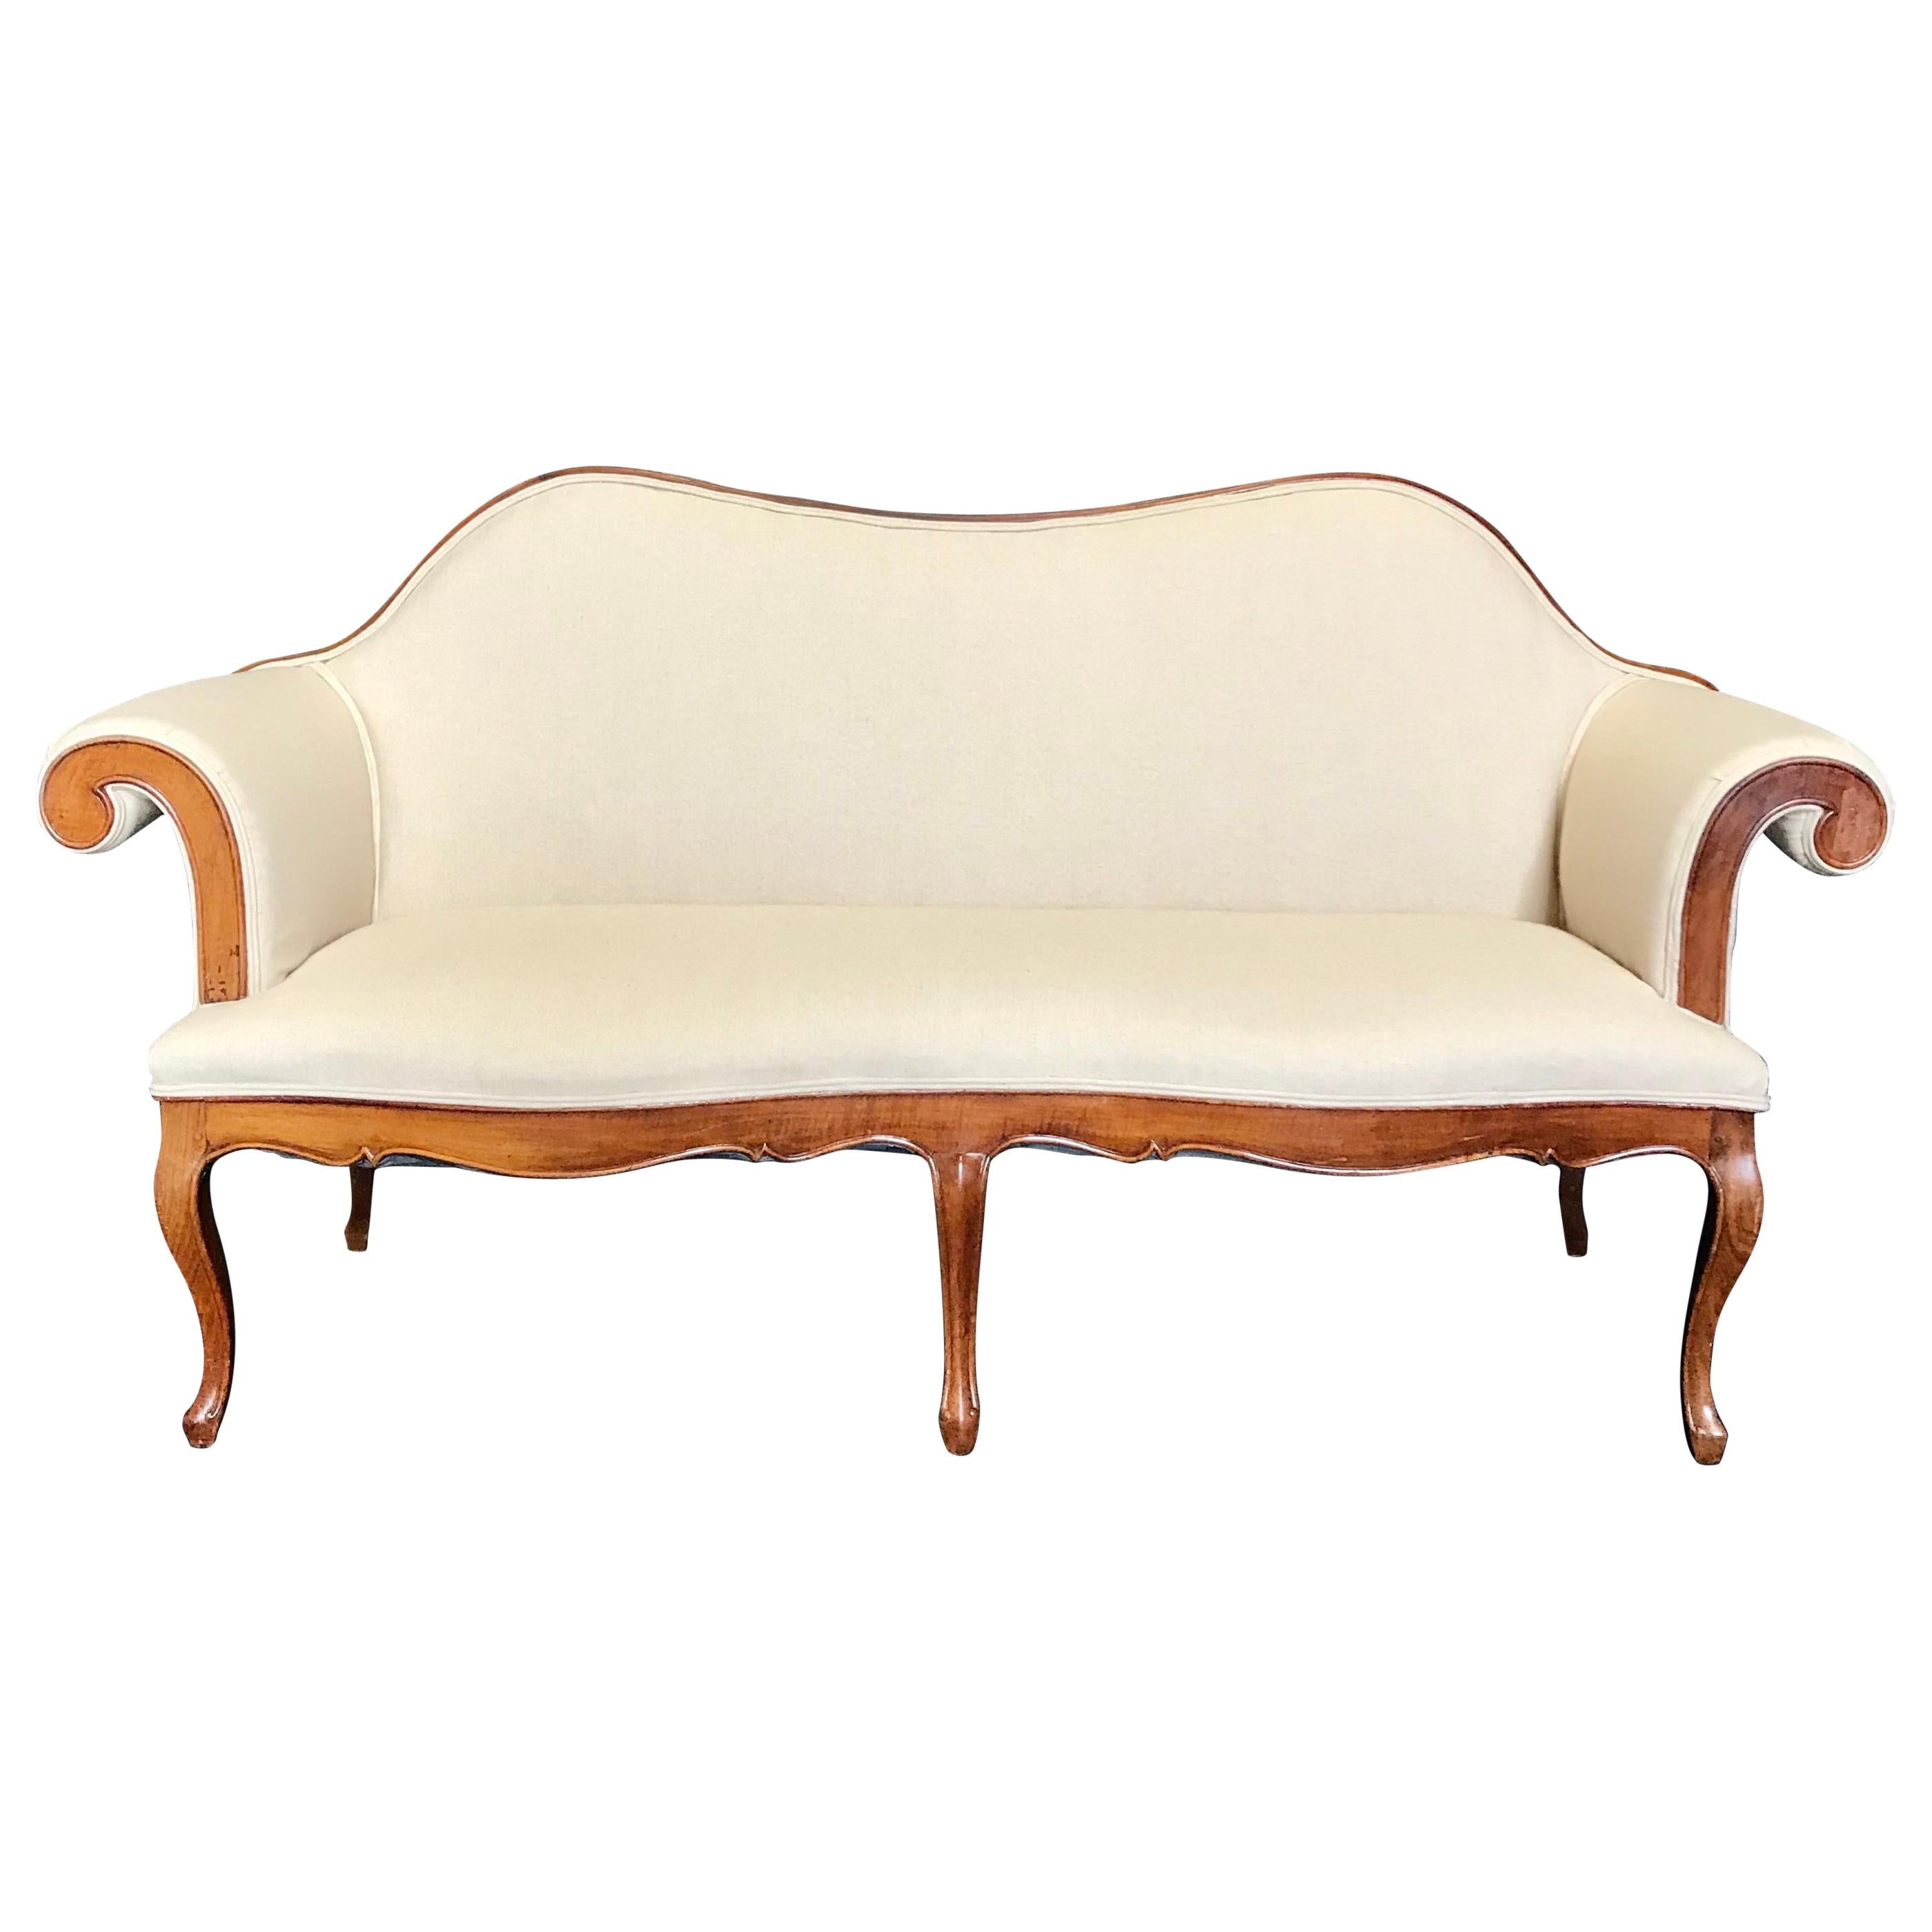  French Louis XV Style Walnut Loveseat with Cabriole Legs